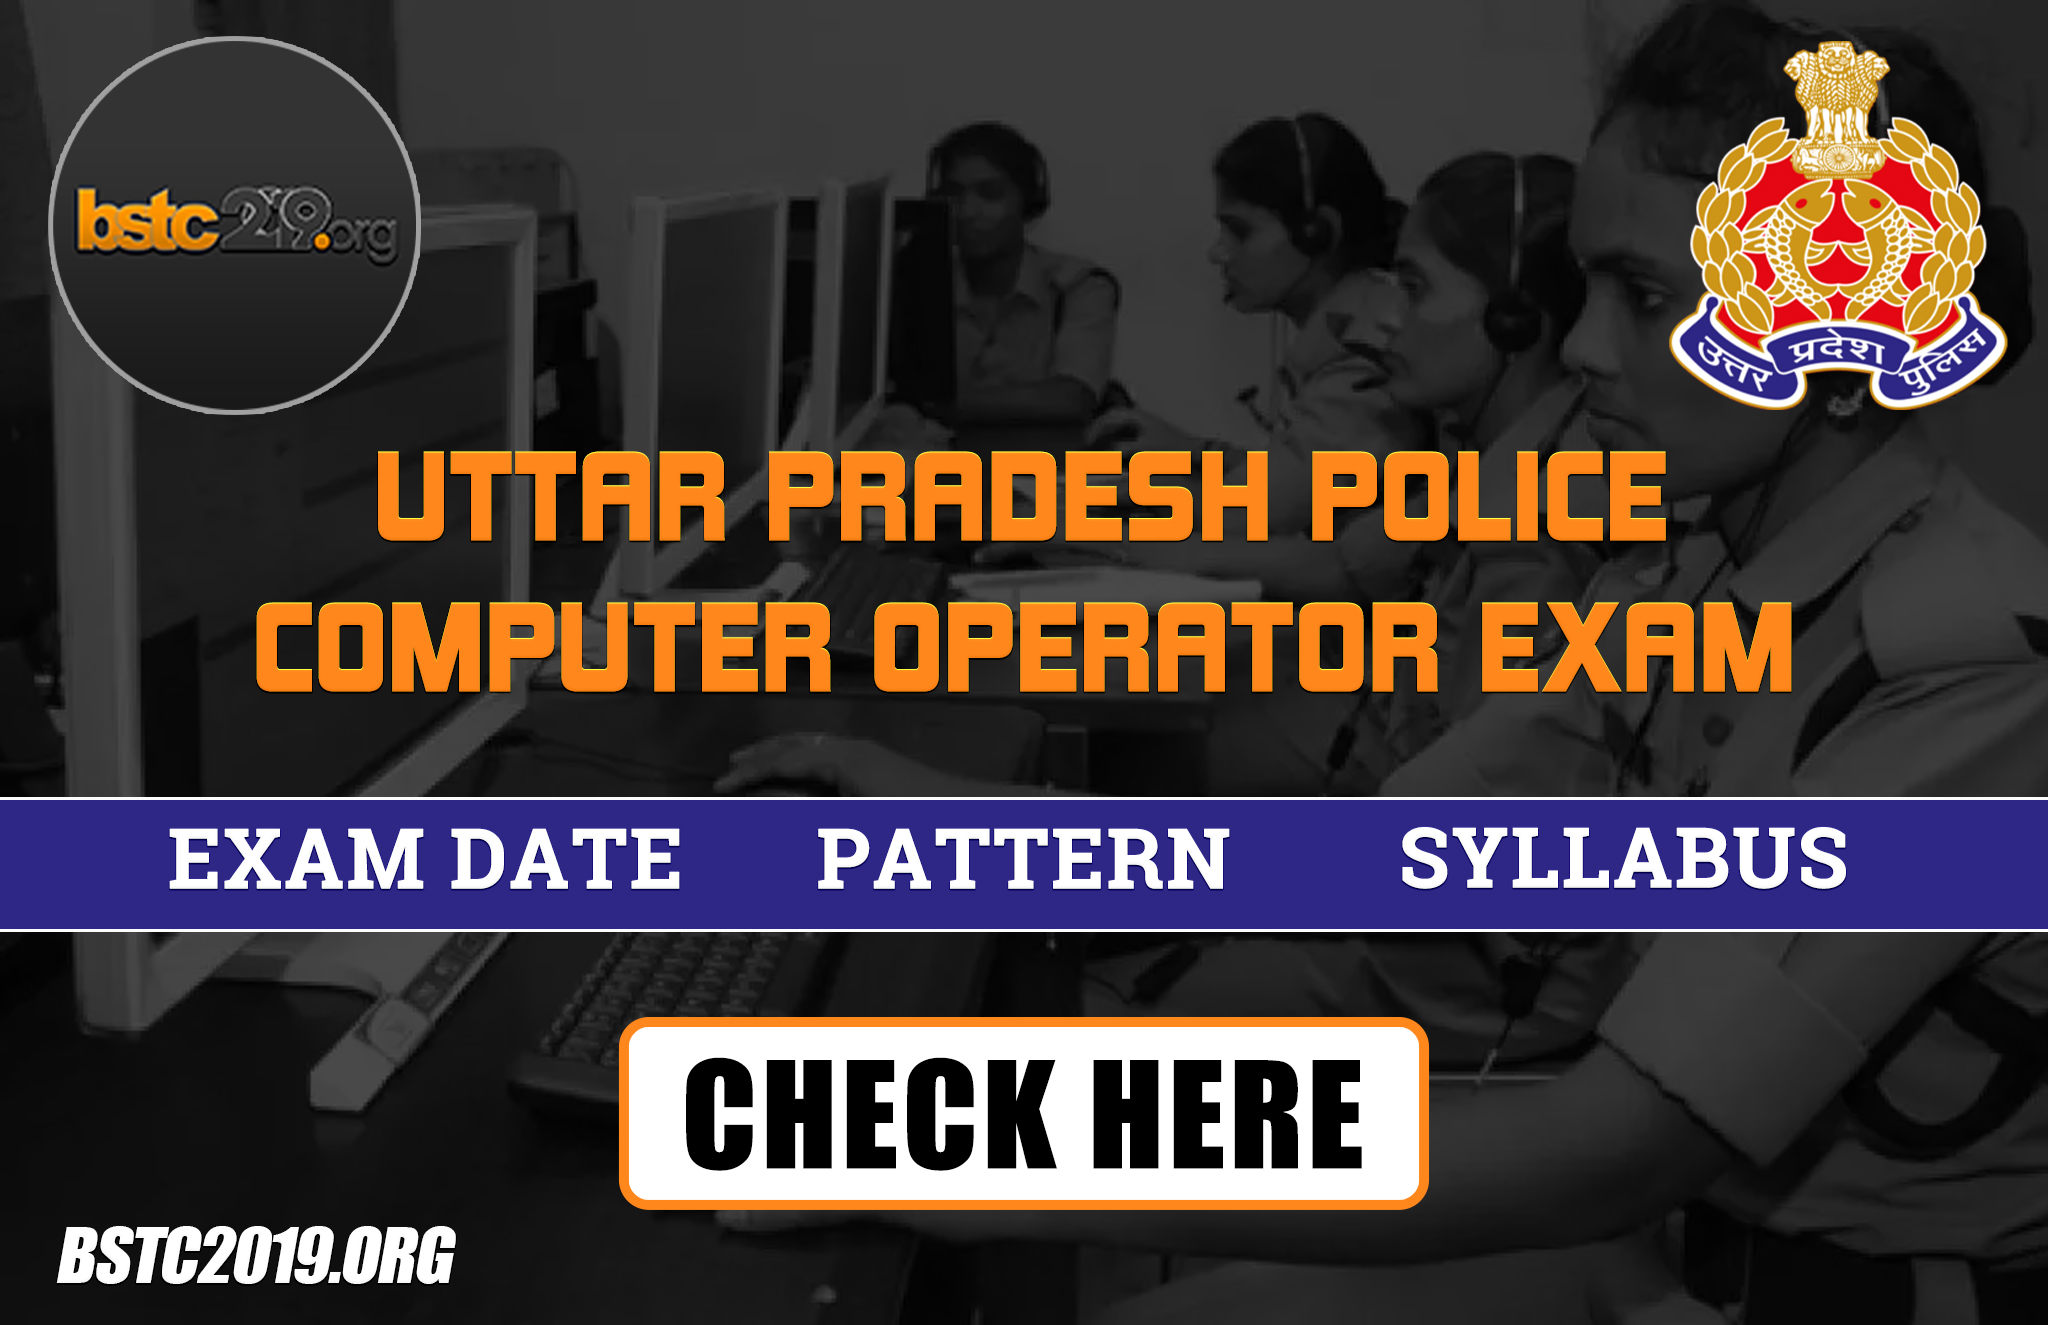 UP Police admit card 2024